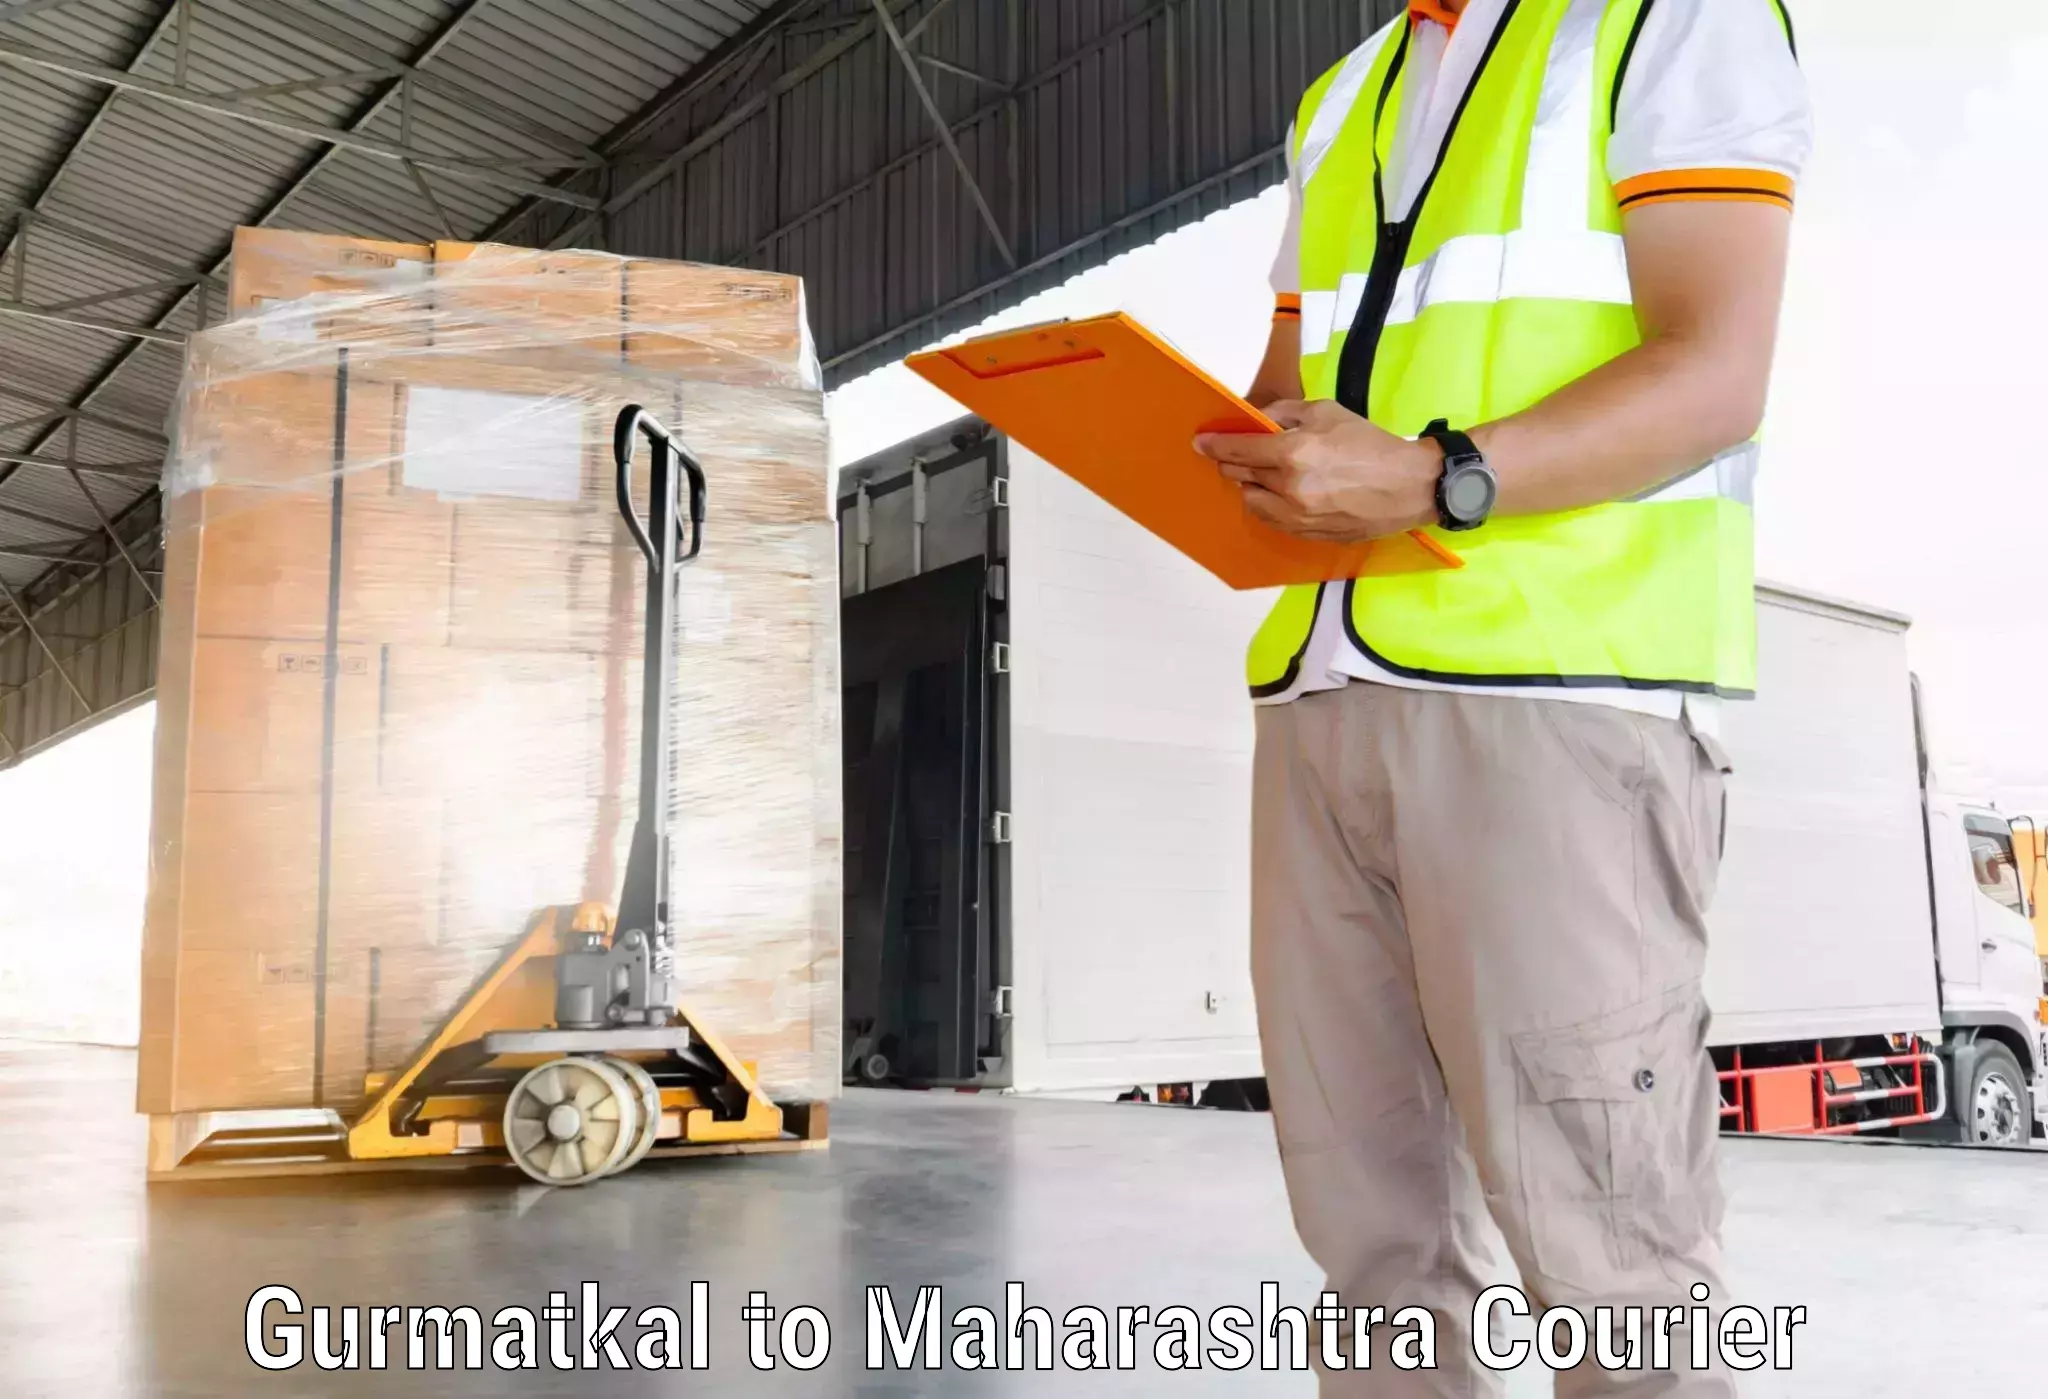 Quality courier partnerships Gurmatkal to Mul